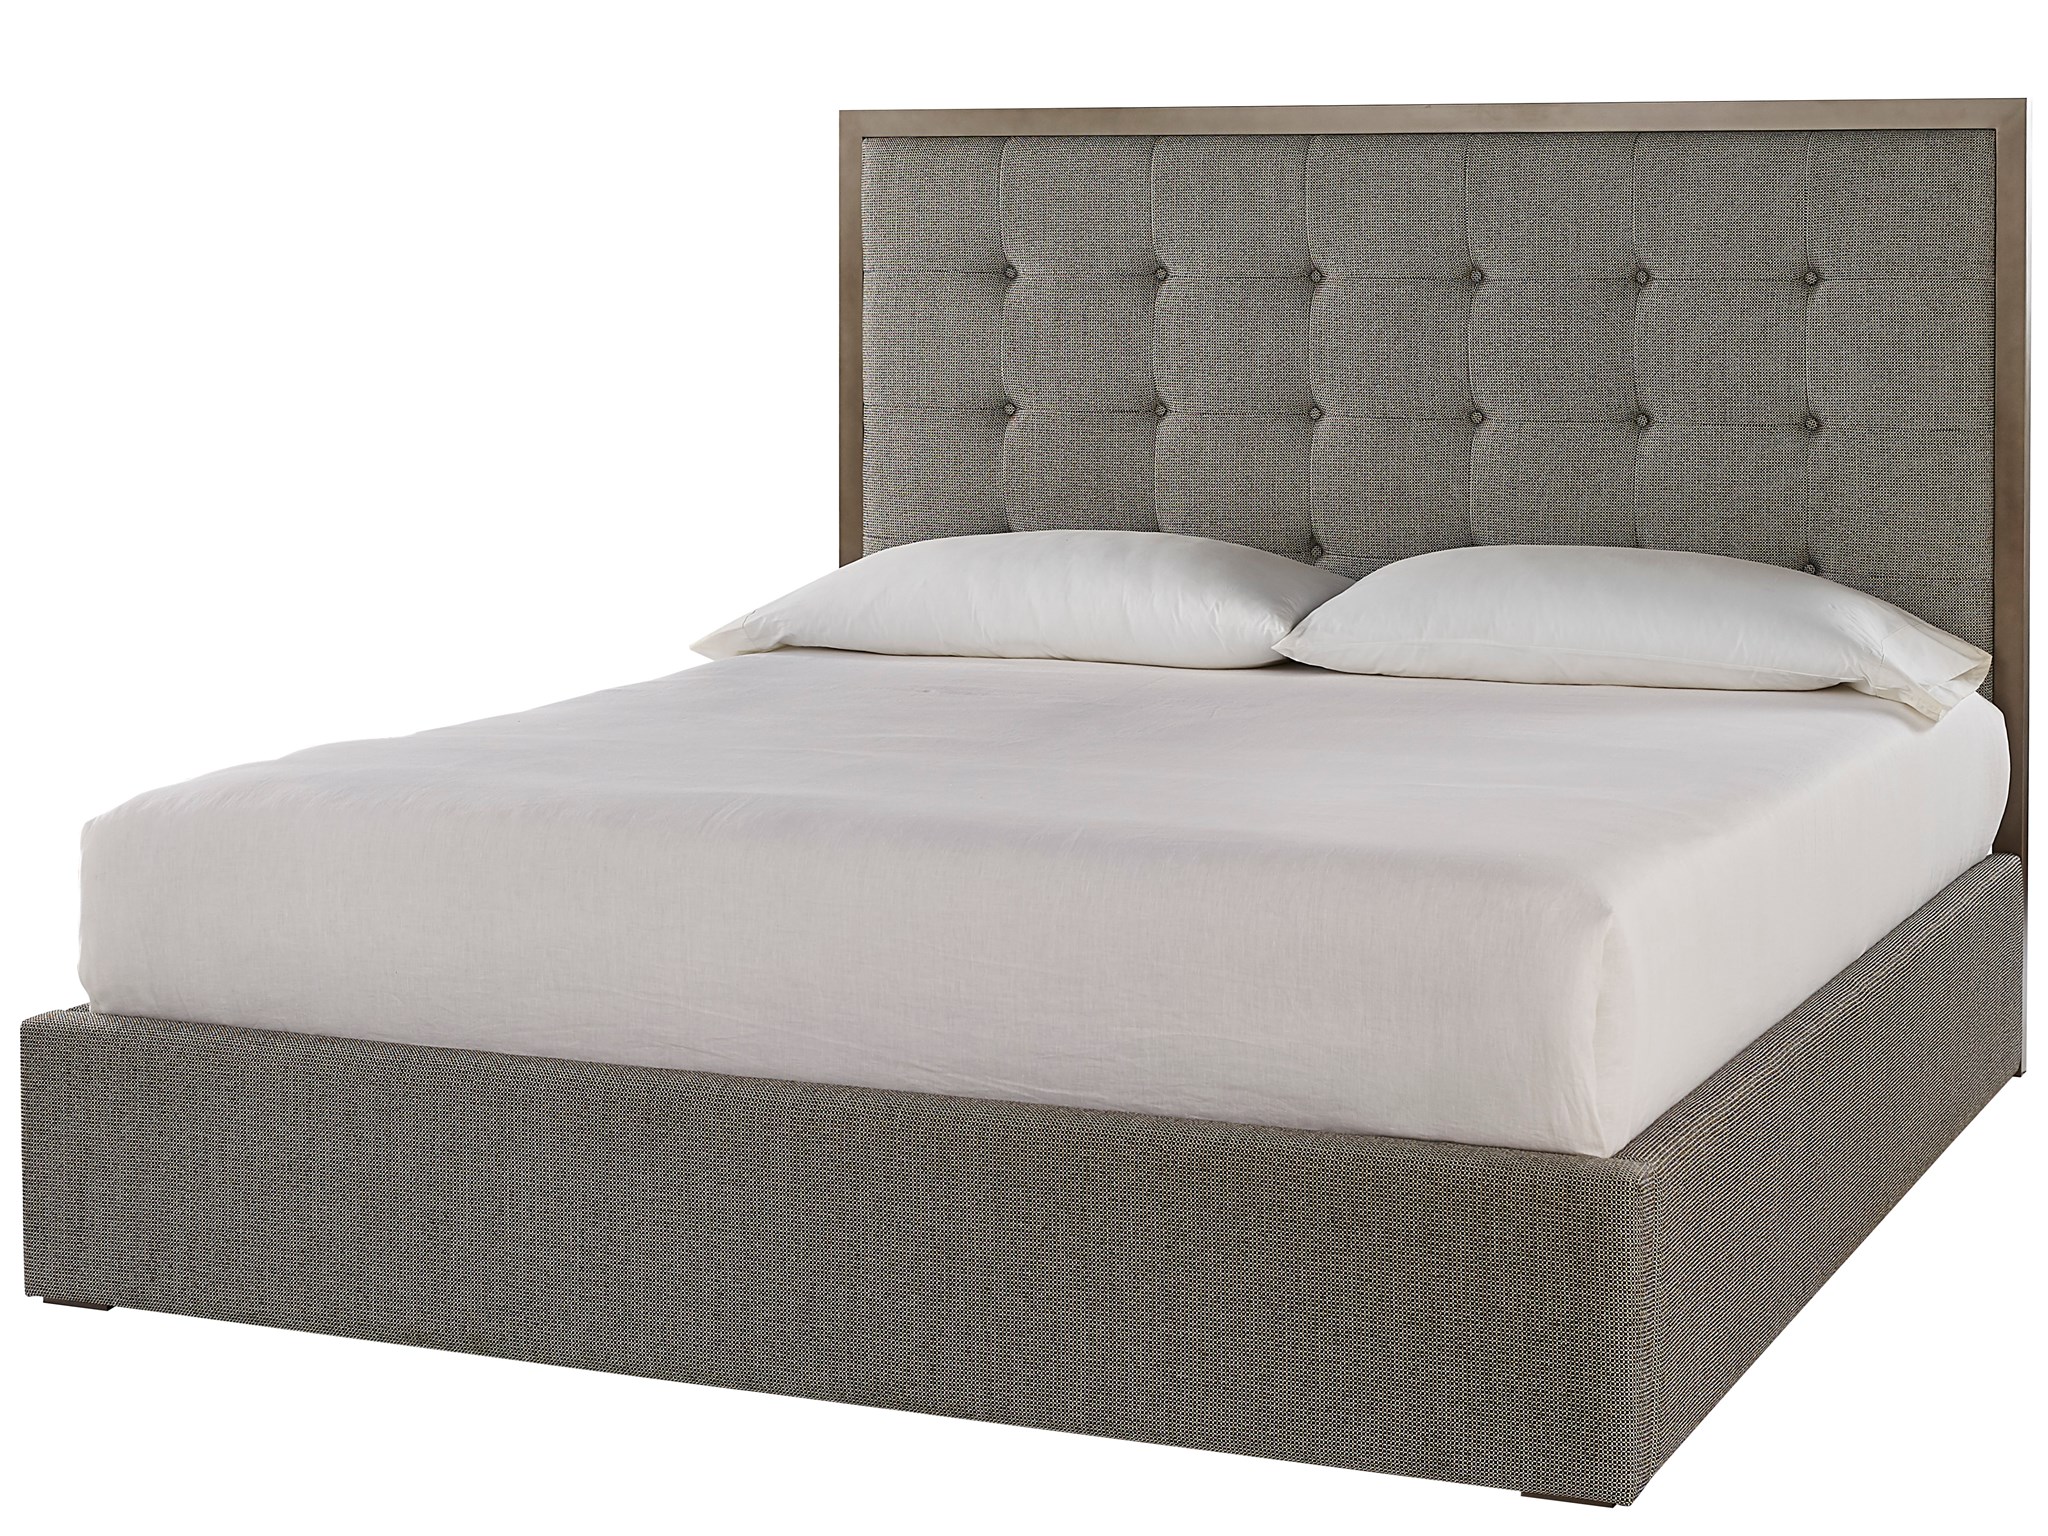 Panel King Bed